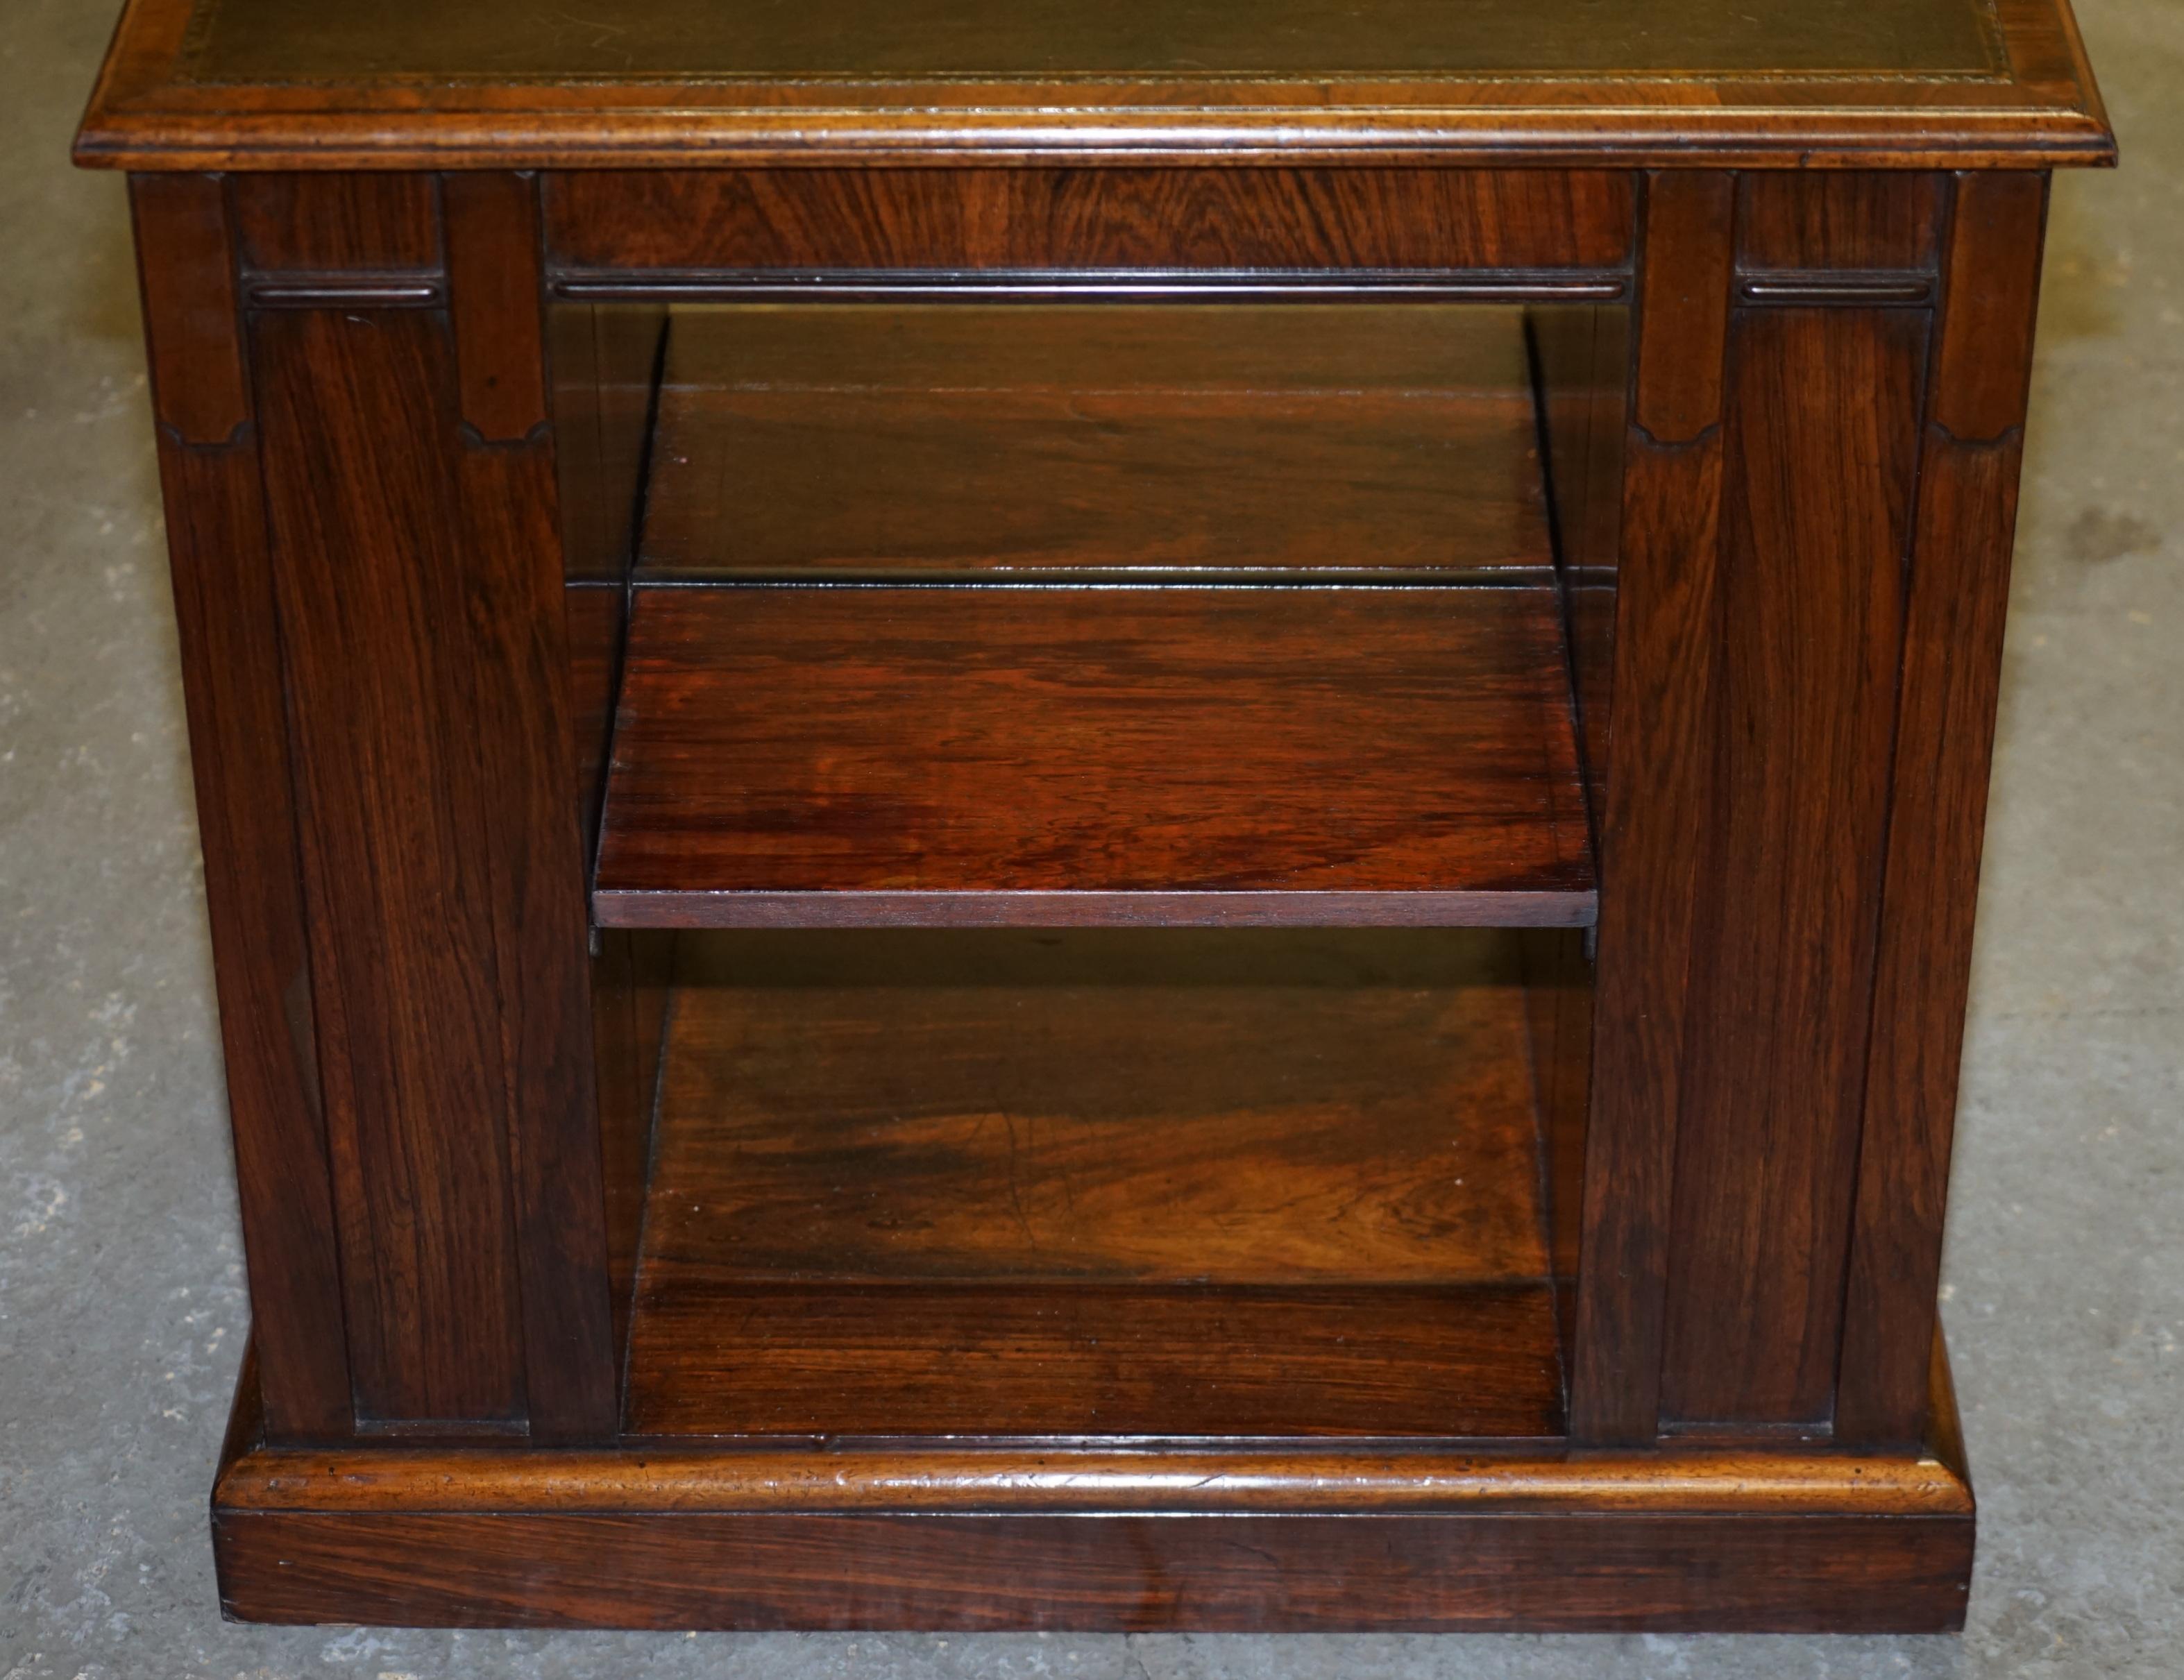 RARE WILLIAM IV CIRCA 1830 HARDWOOD LIBRARY FOLIO CABiNET WITH DRAWERS BOOKCASE For Sale 8